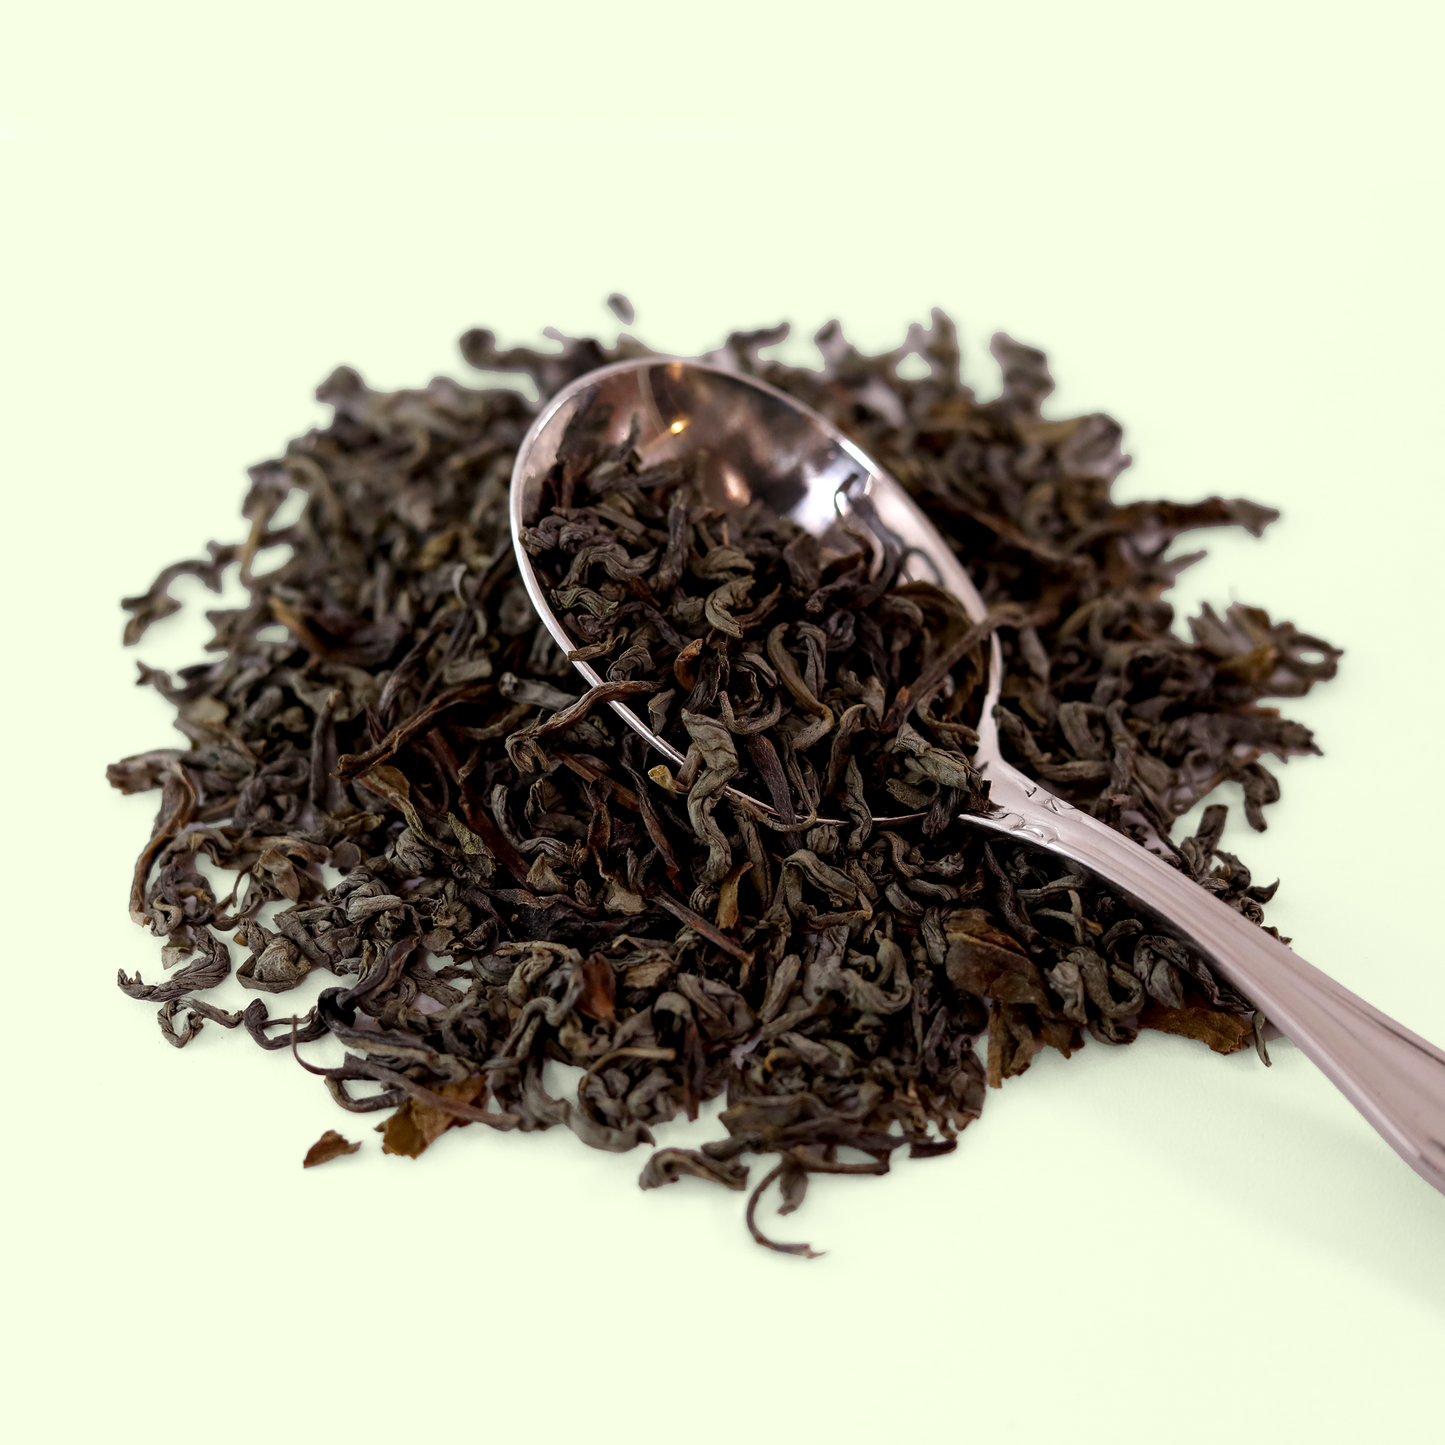  A close-up view of a pile of dried April Meadows Green tea leaves. A metal spoon is visible, scooping up some of the tea blend. A Good Store product.